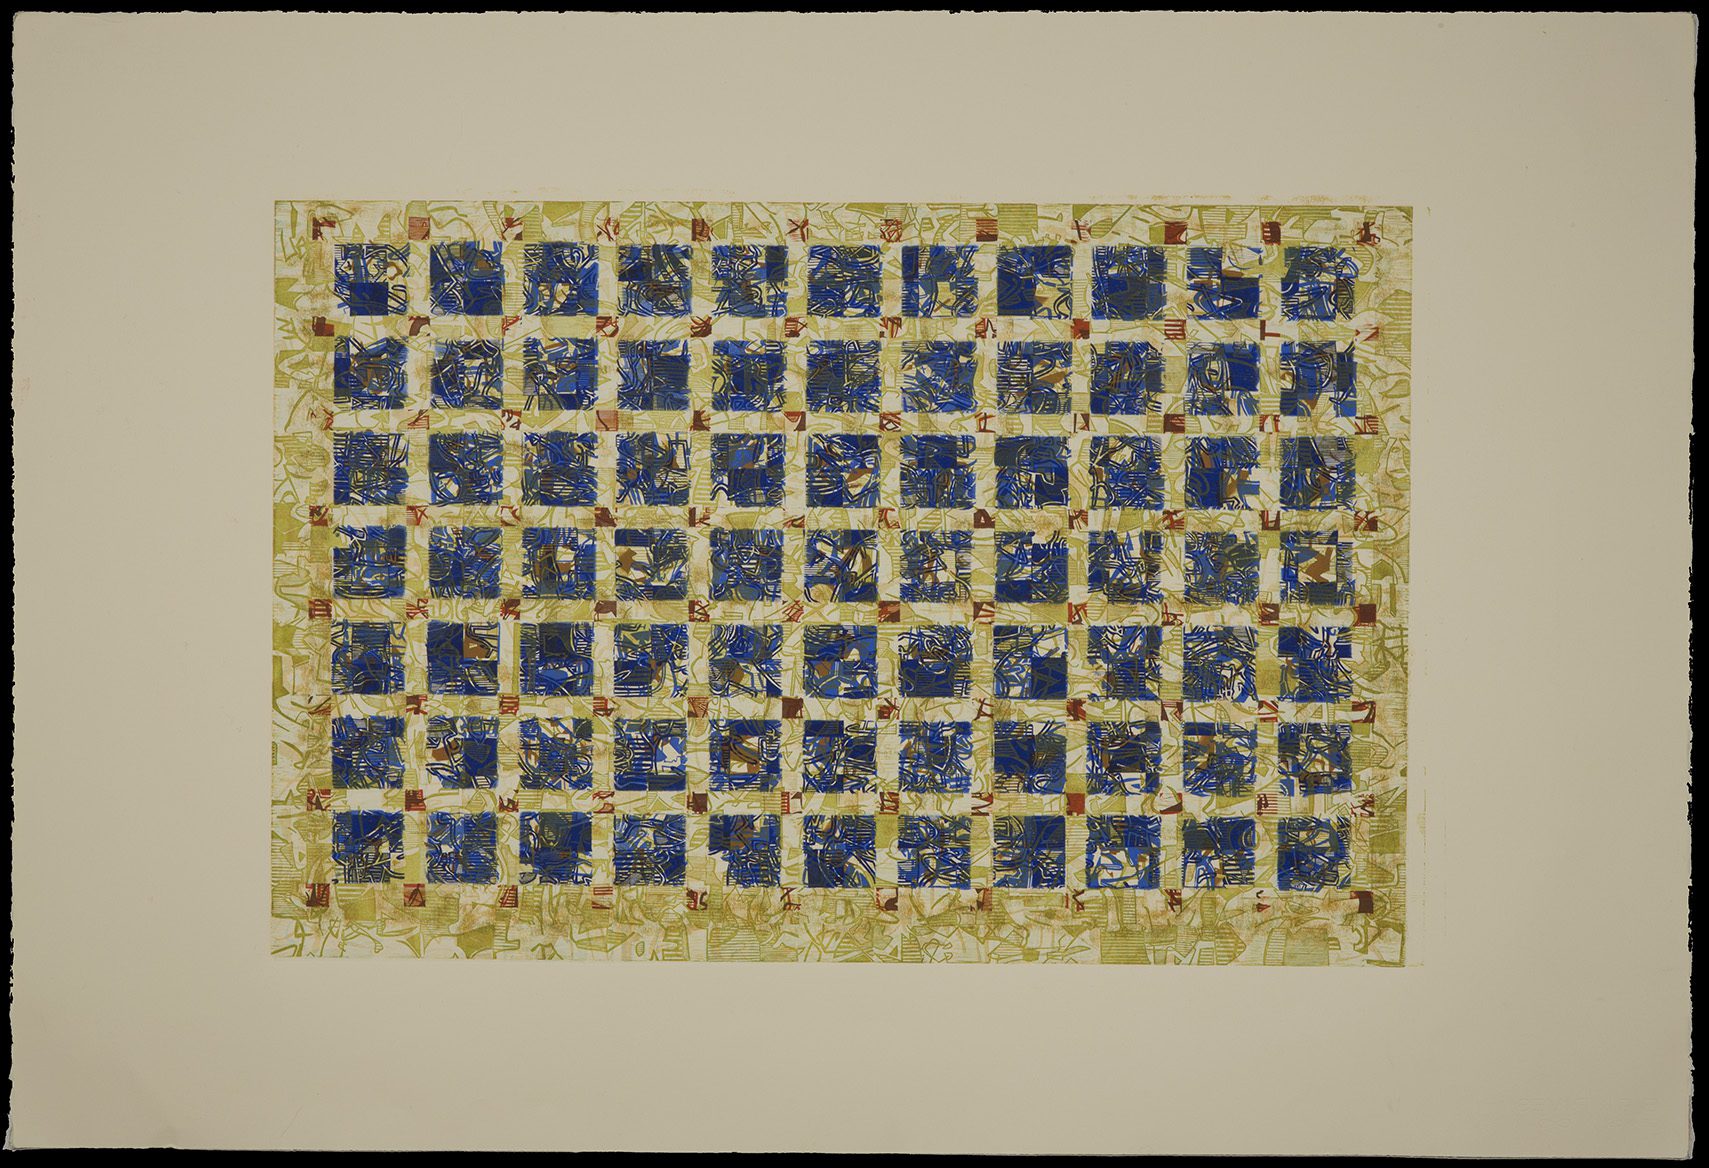 A painting of a blue and yellow checkered pattern.